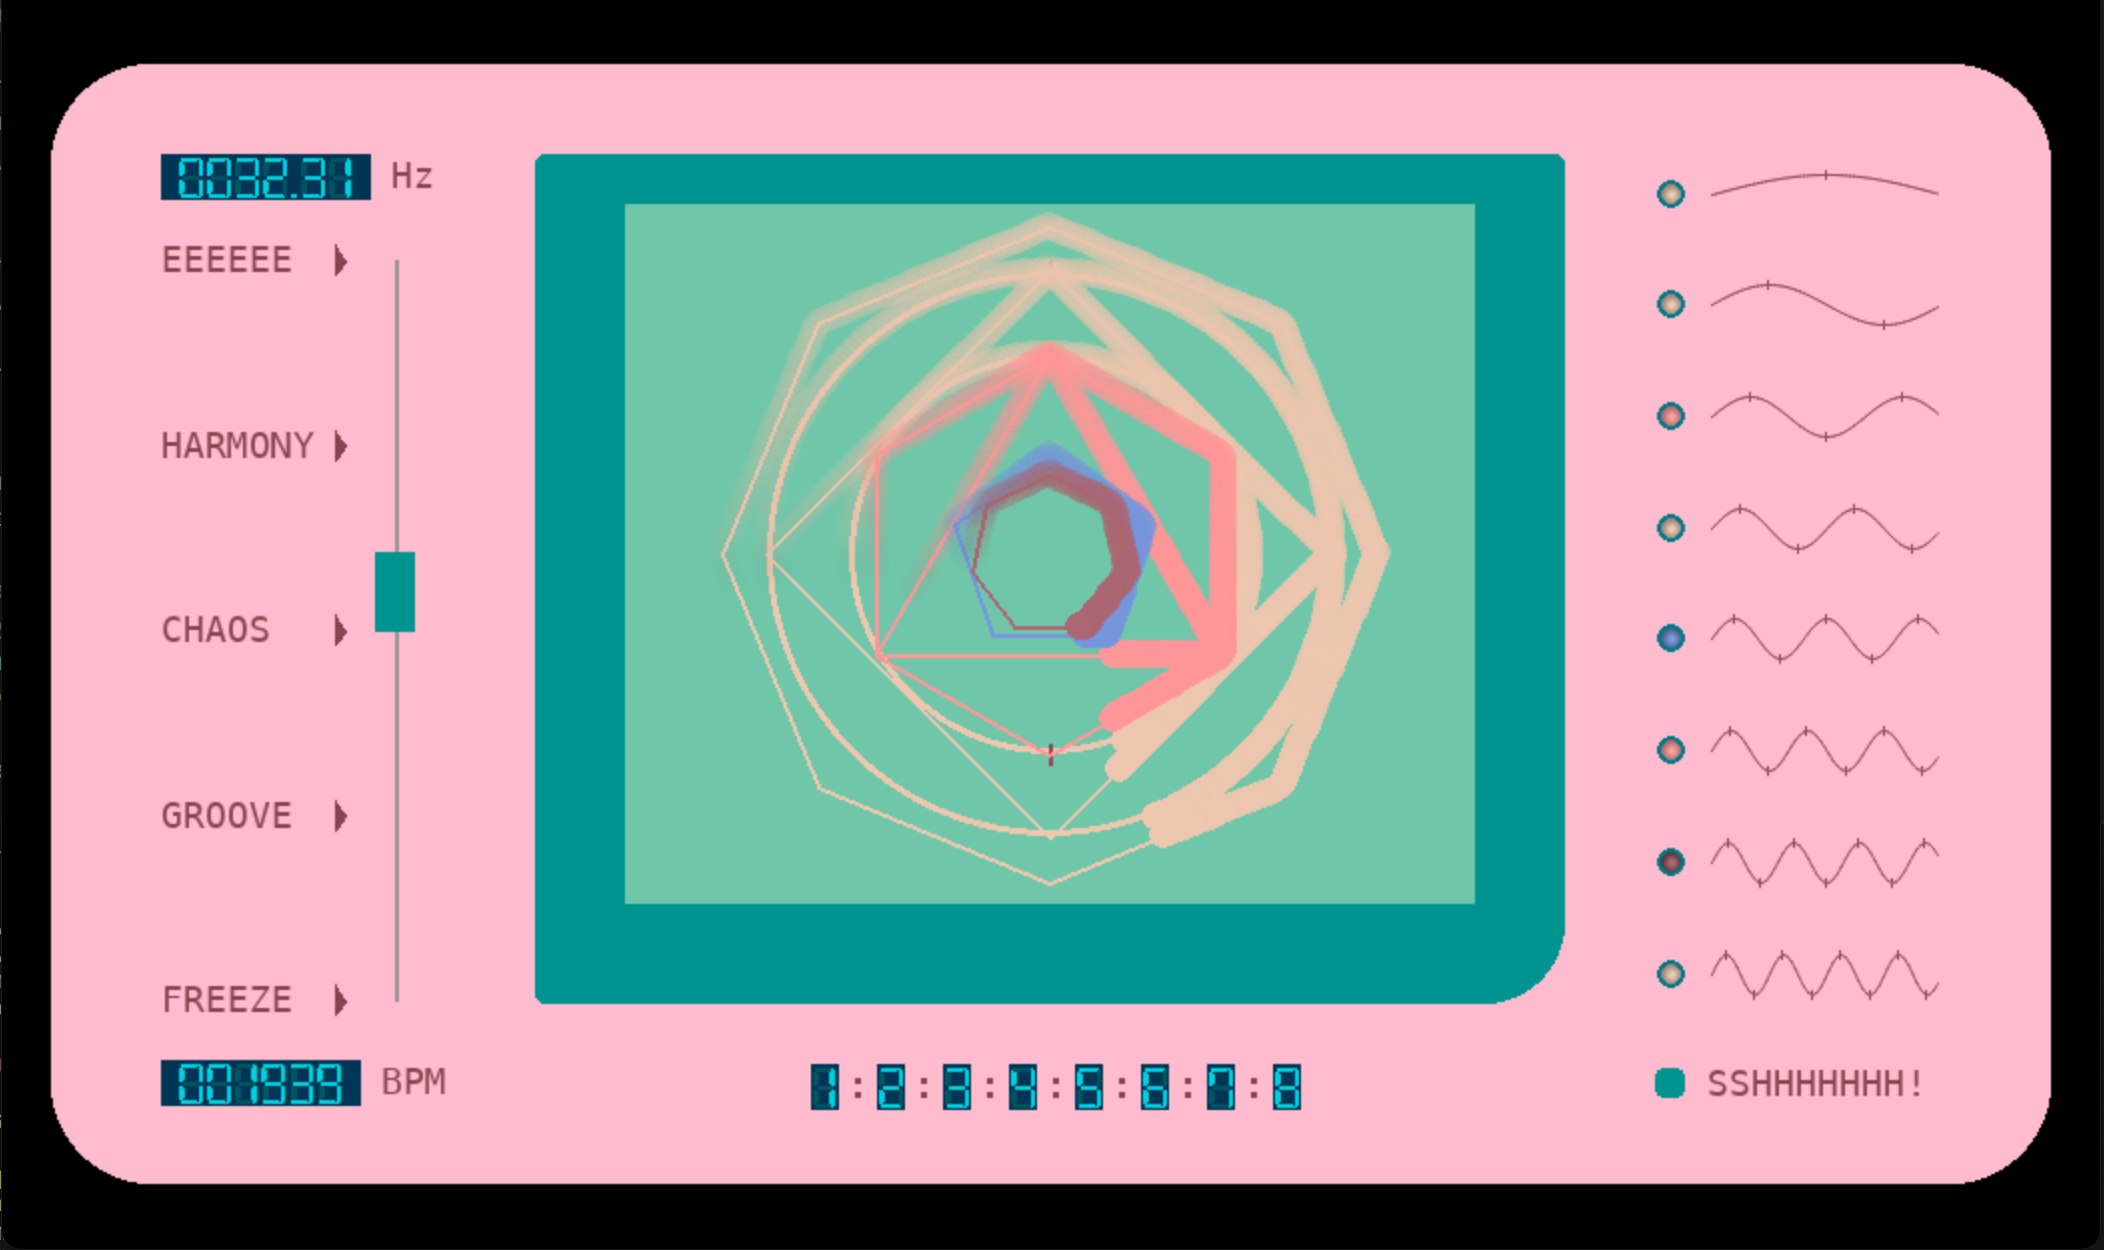 Screencap of the 
          rhythmonics project with an old-school console aesthetic and pastel pink
          and aquamarine colors.